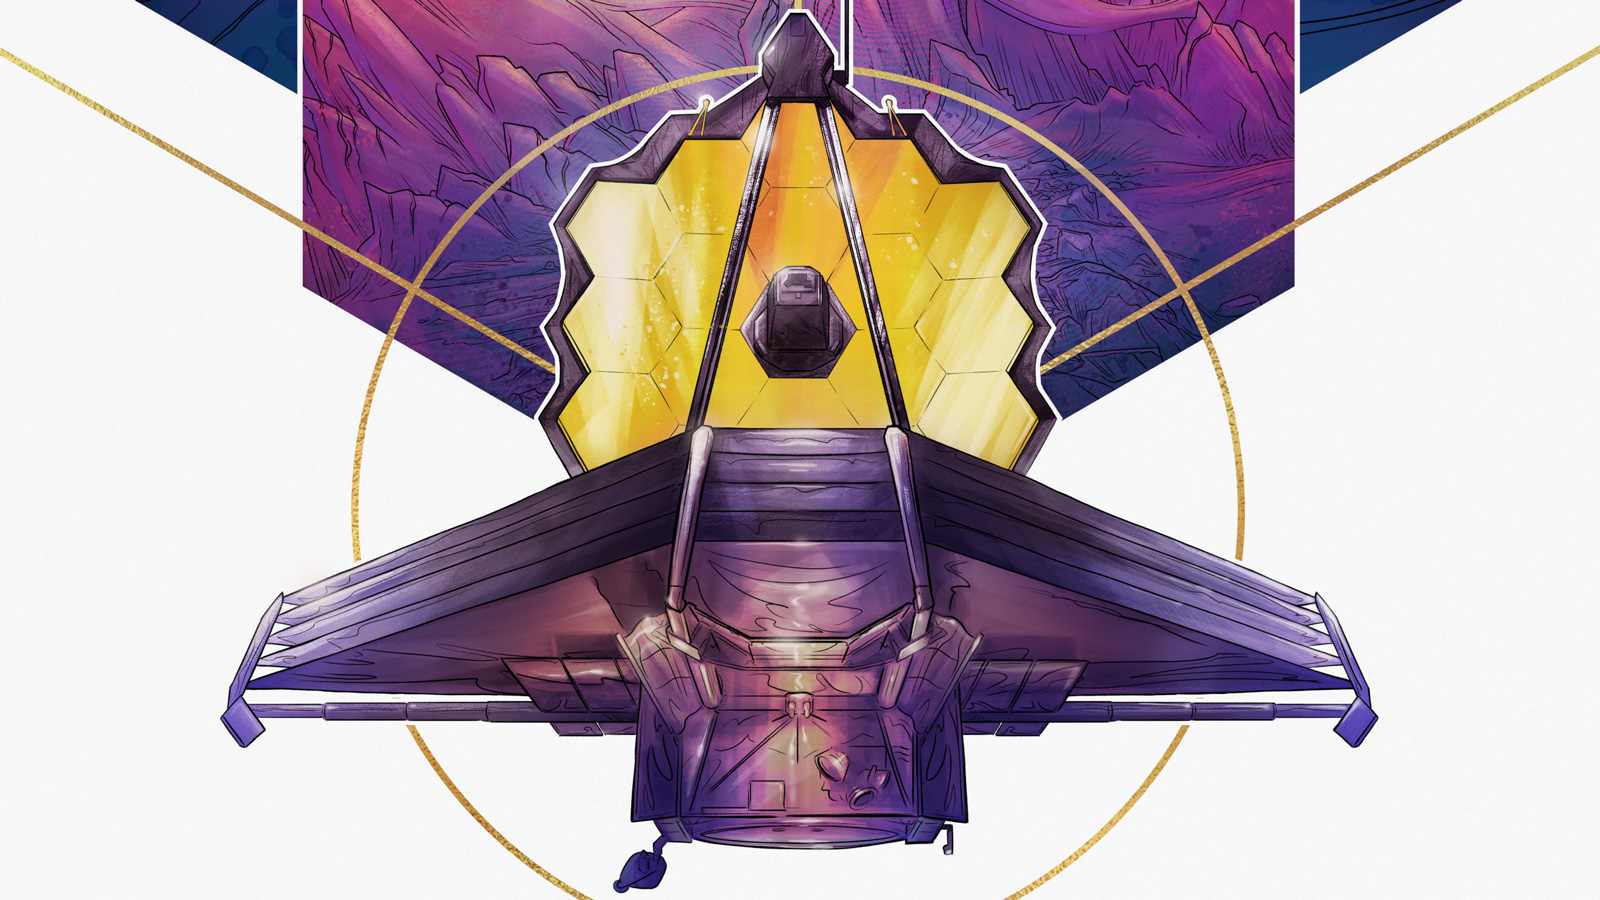 slide 2 - illustrated poster depicting the James Webb Space Telescope against a colorful geometric background